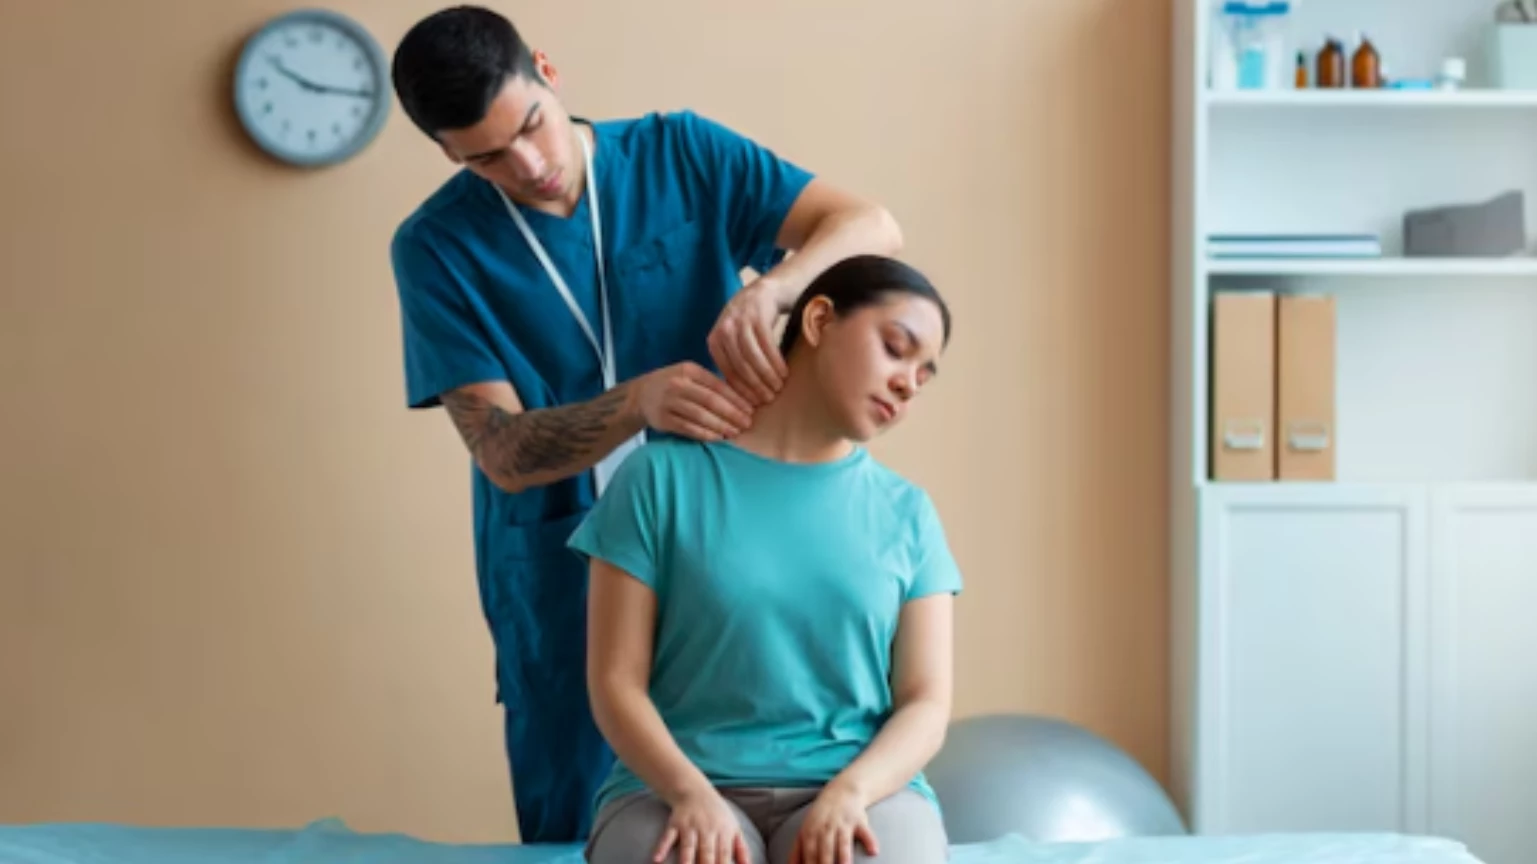 Women's Wellness The Benefits of Seeing a Female Chiropractor in Houston